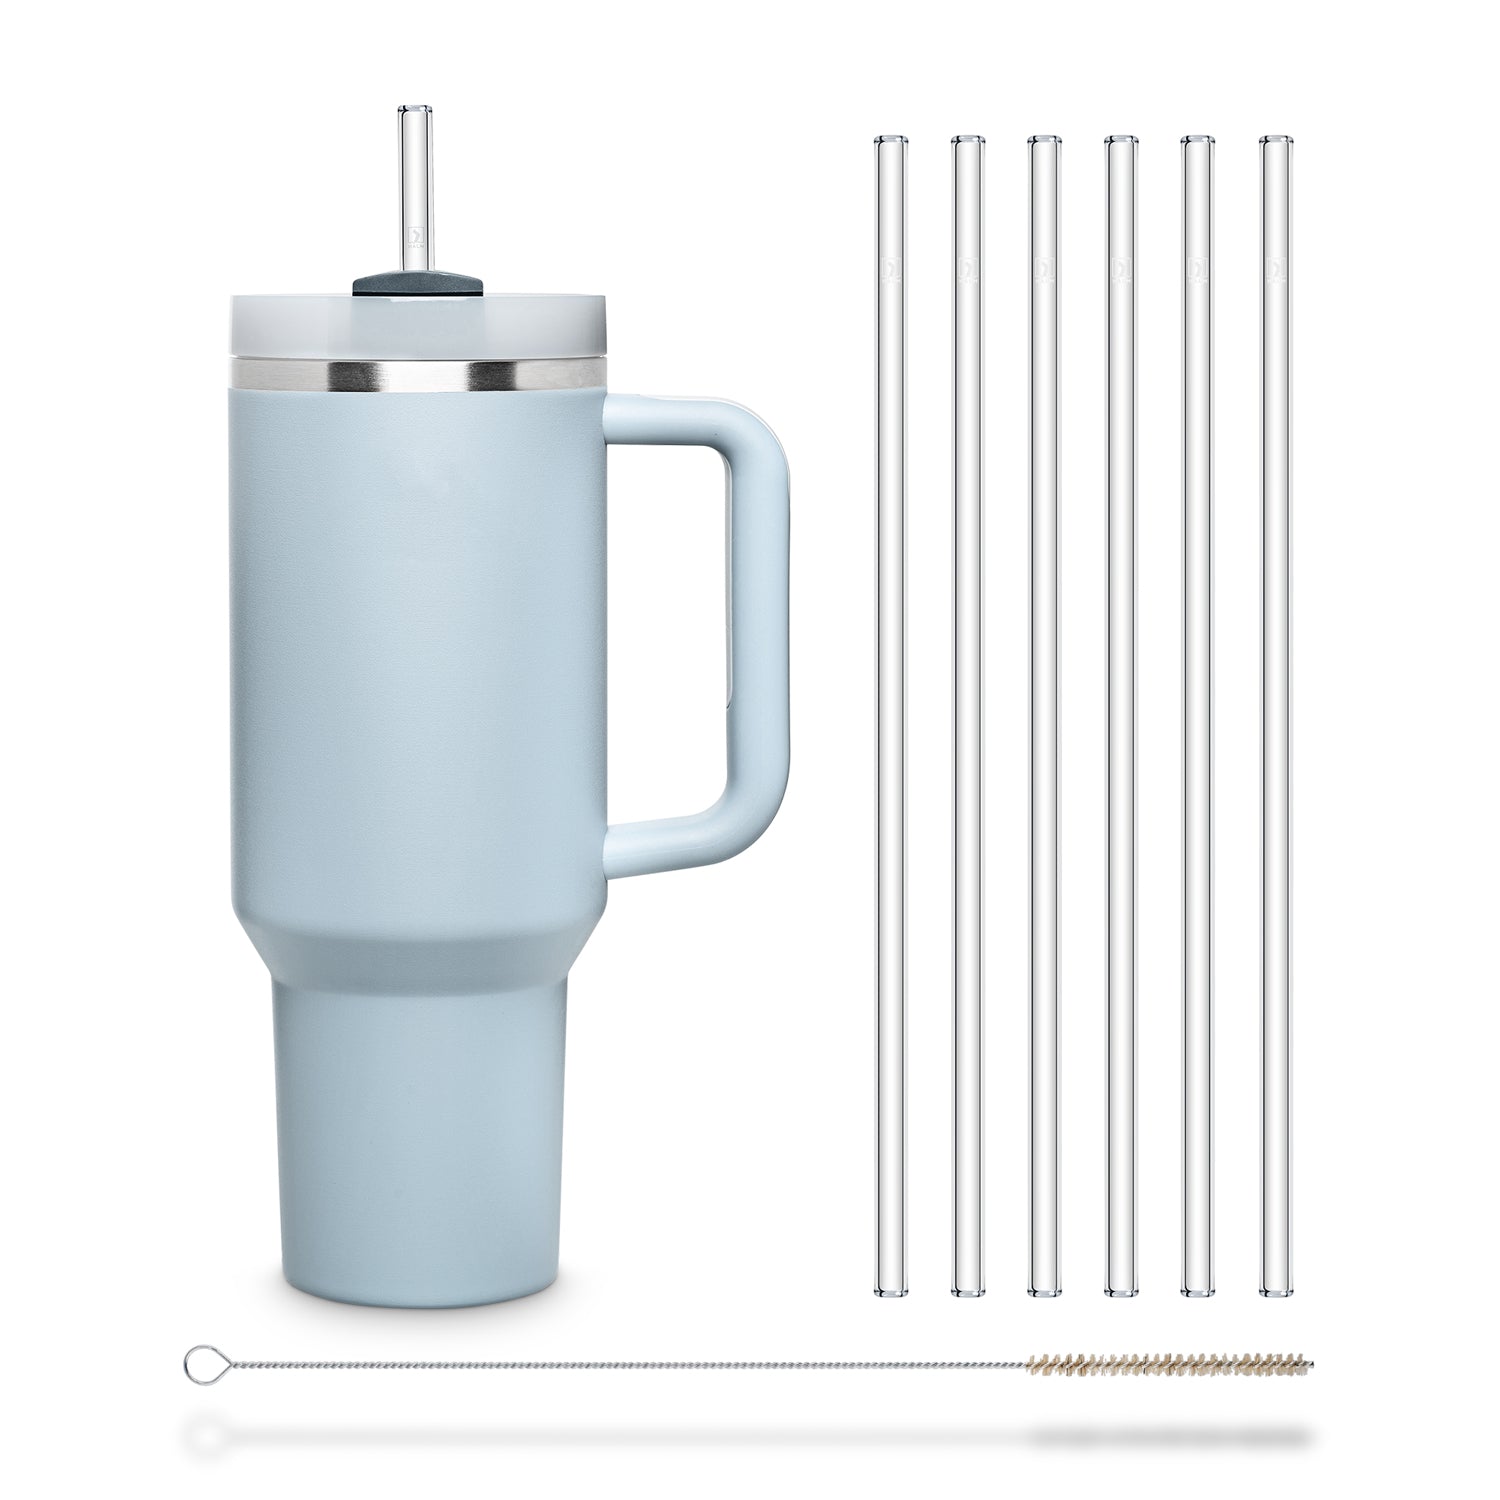 https://halmstraws.com/cdn/shop/files/12-inch-Glass-straws-set-6-pack-for-40oz-Stanley-Cup-mug-Reusable-drinking-straws-sustainable-best-size-buy-online-with-cleaning-brush-30cm-long-XL-large-straw.jpg?v=1683583049